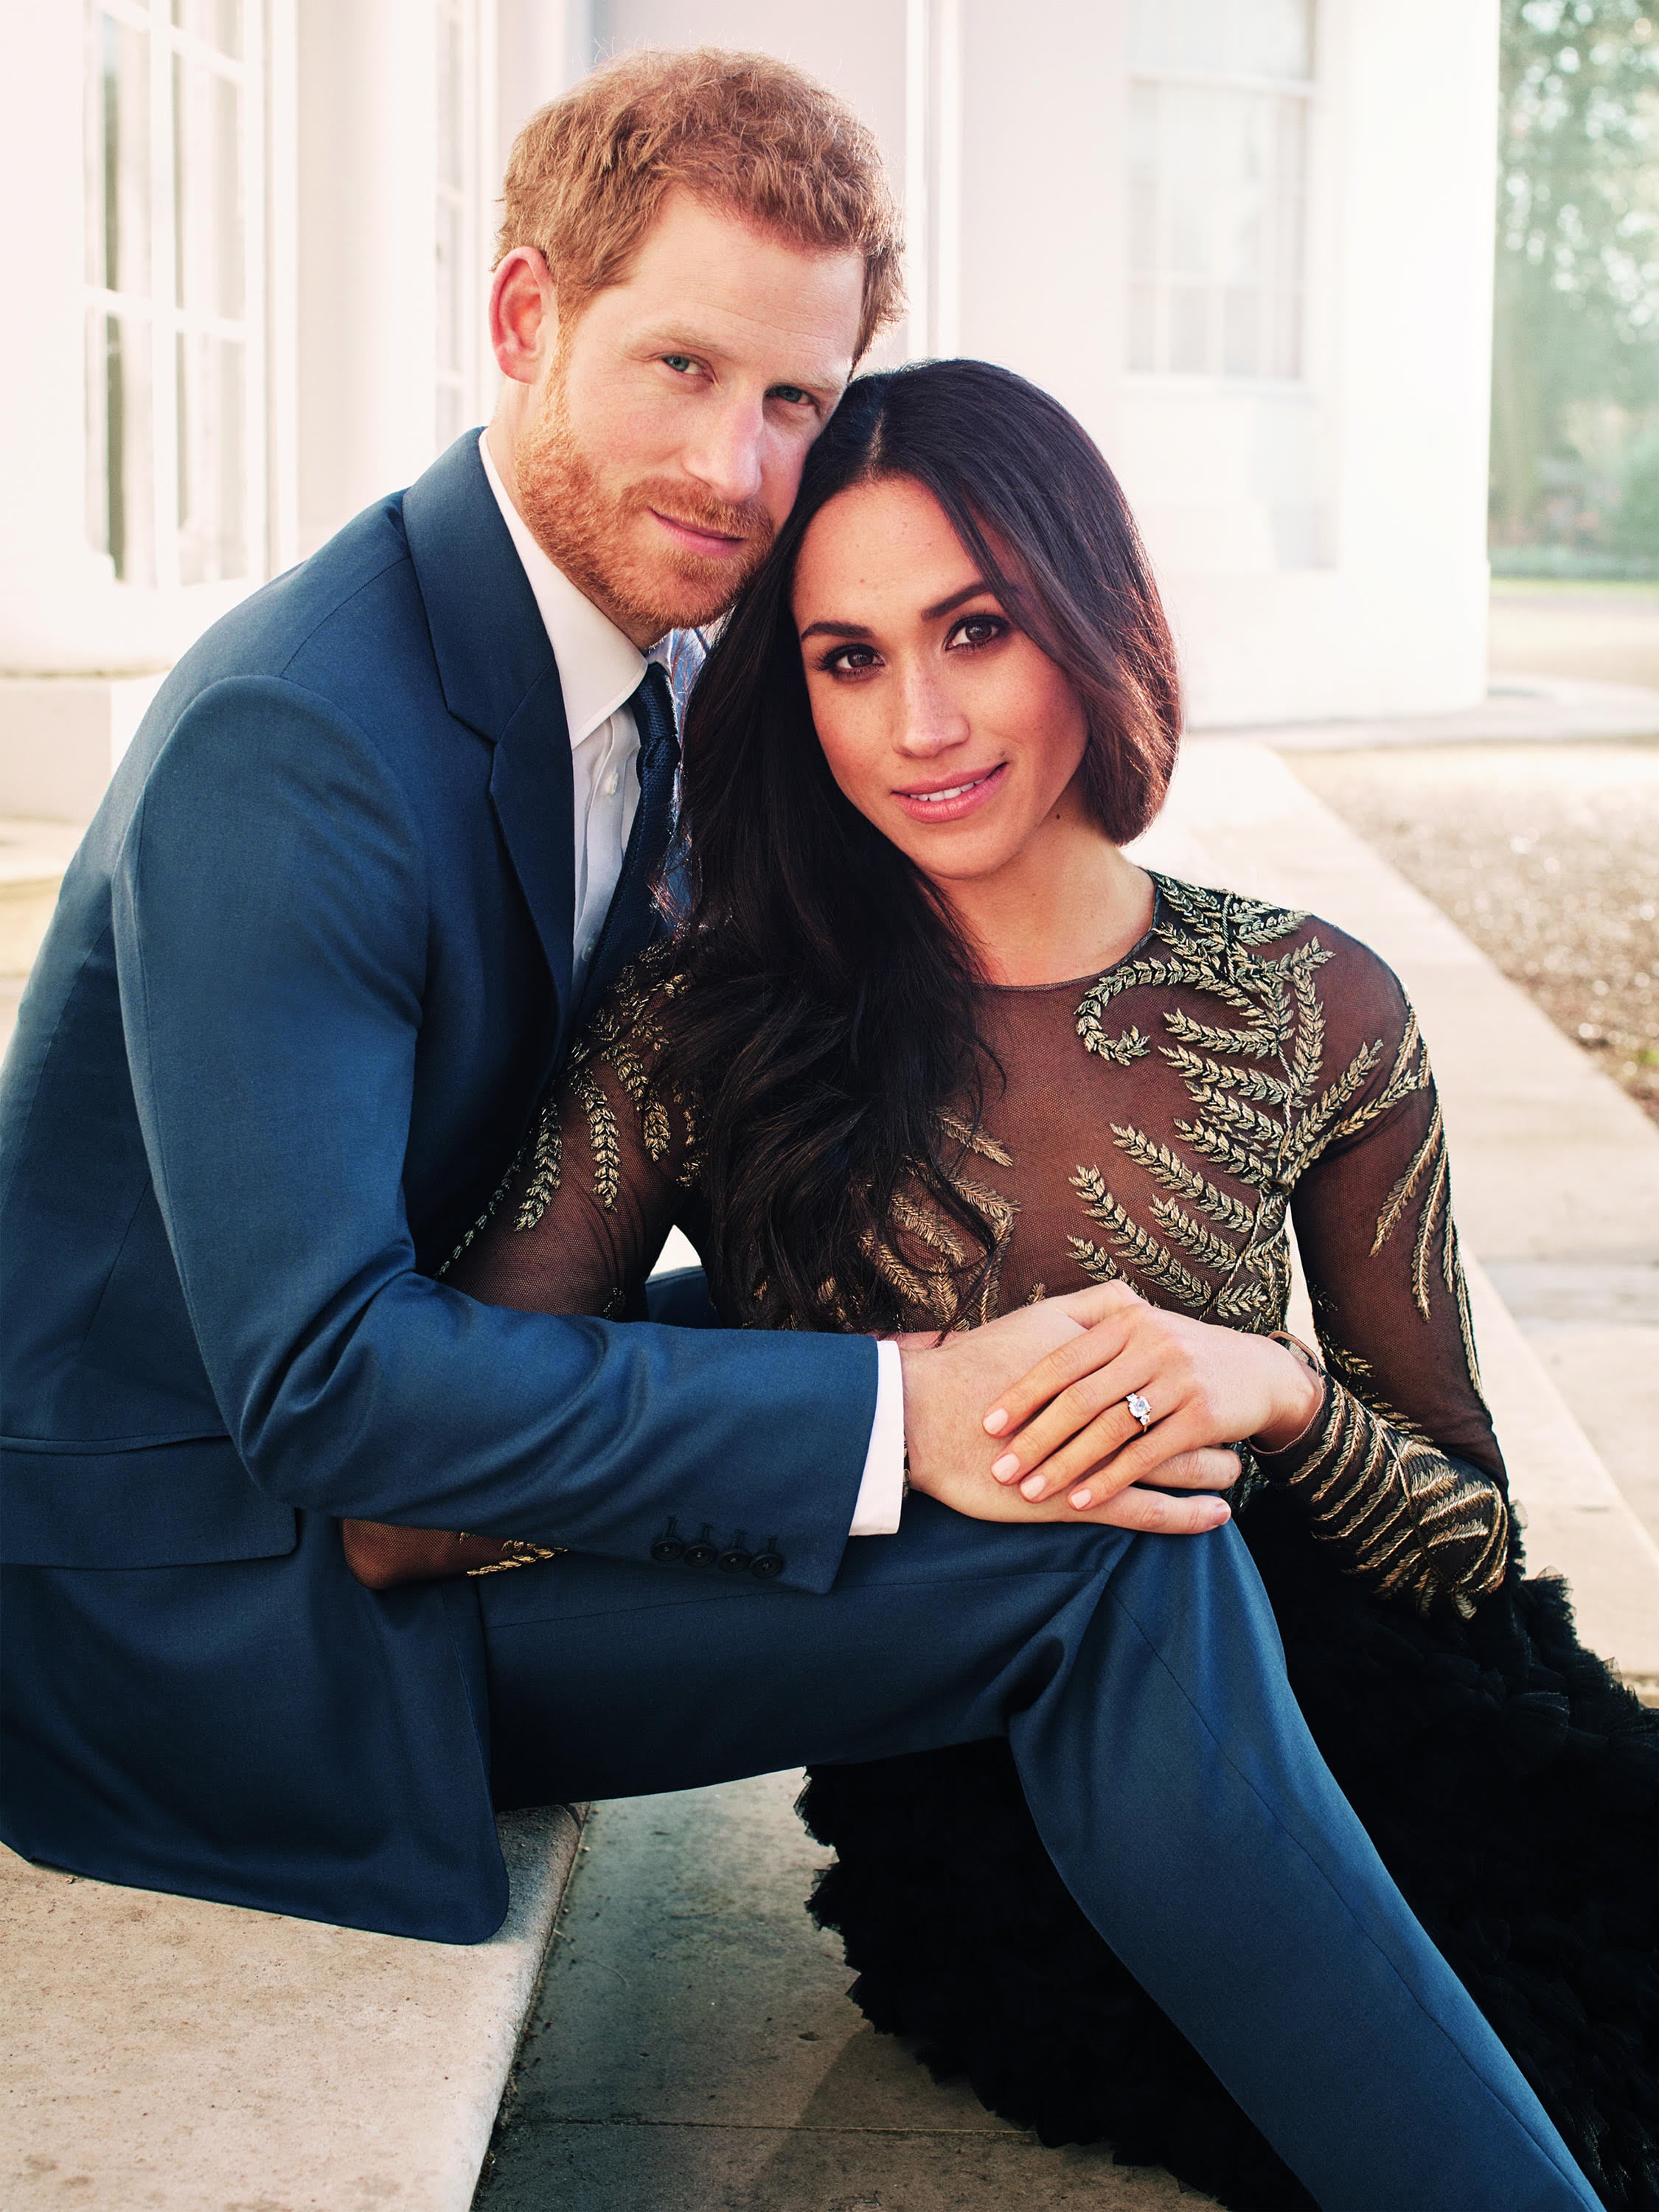 Official engagement pictures of Prince Harry and Meghan Markle taken at Frogmore House in Windsor